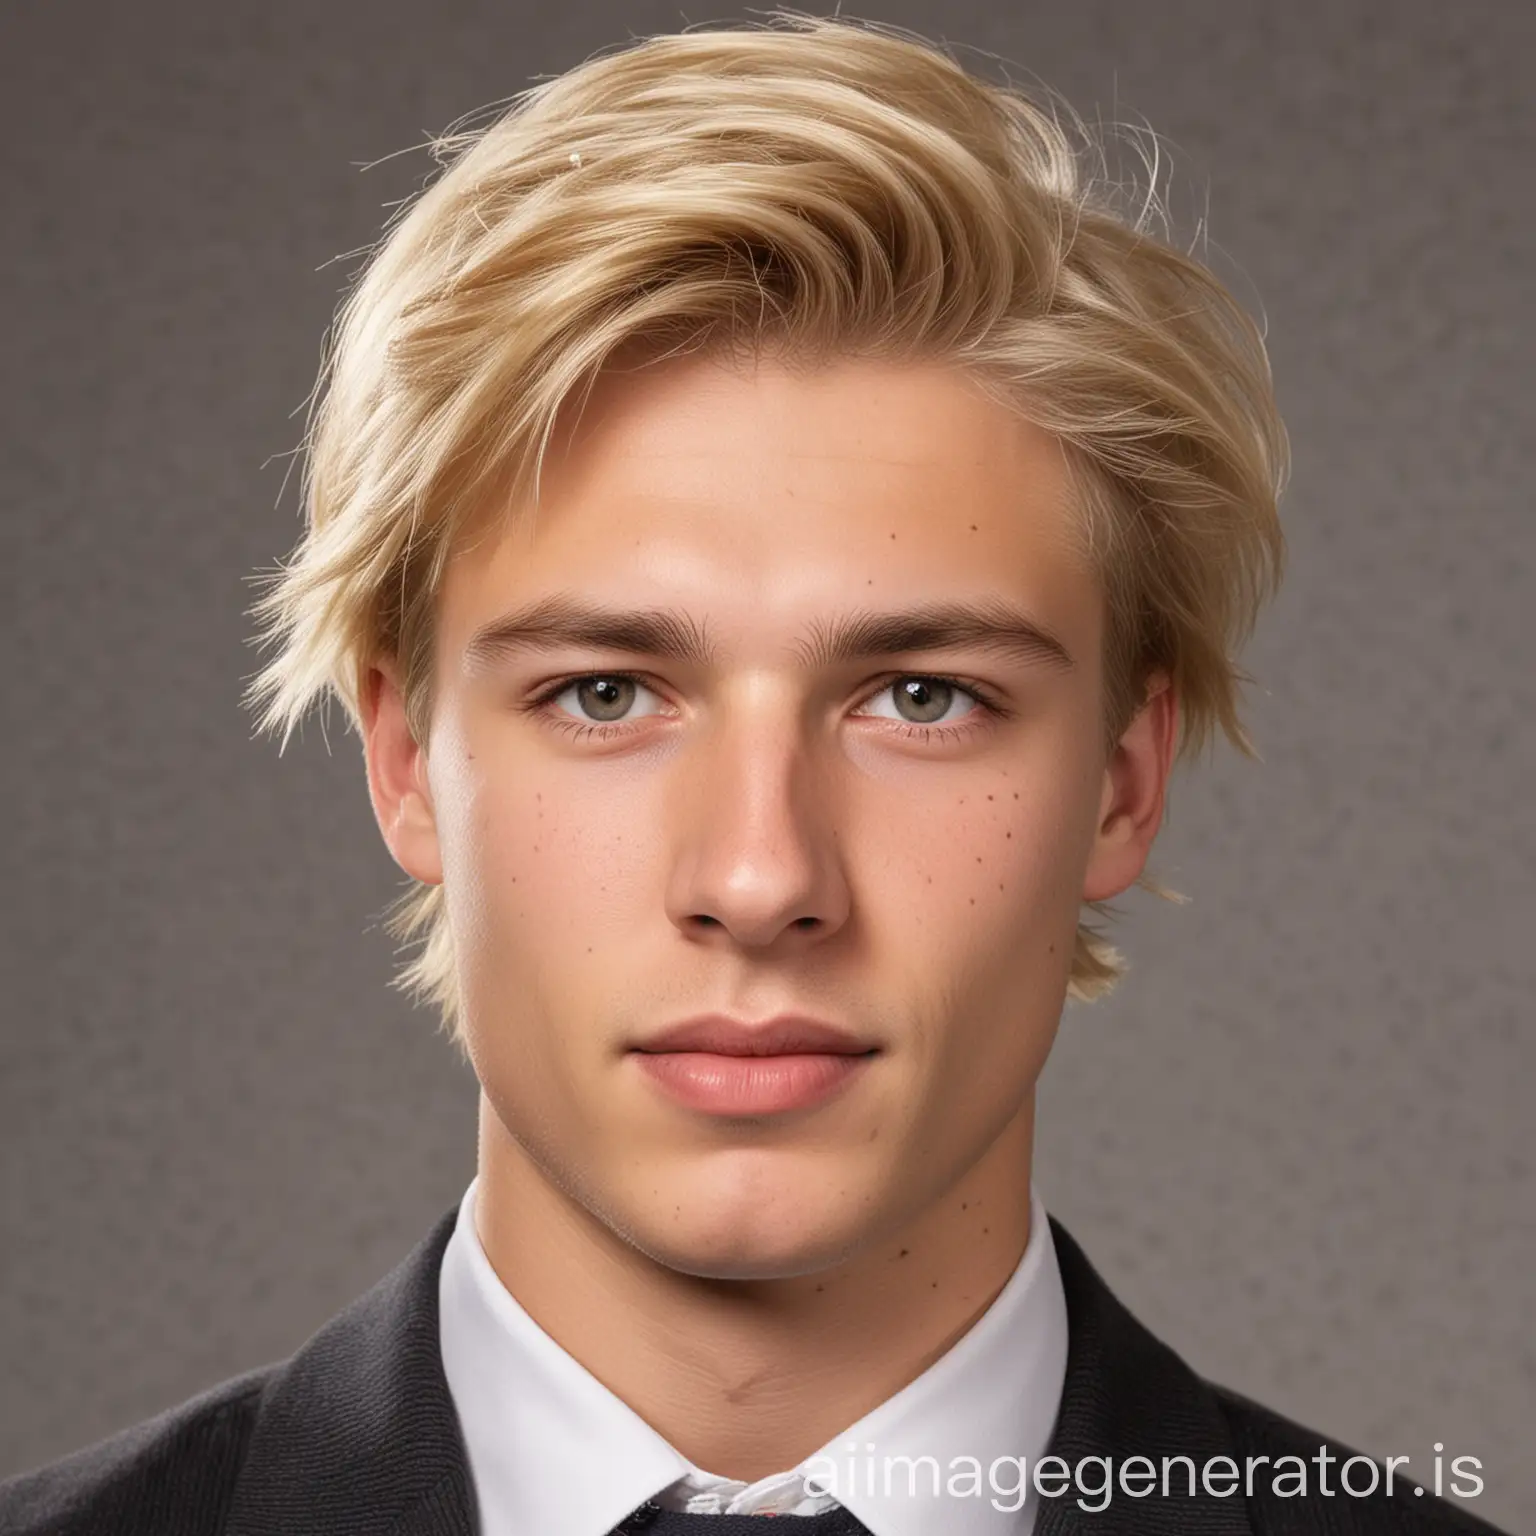 
young, ambitious mail 
student with blond hair from The Netherlands